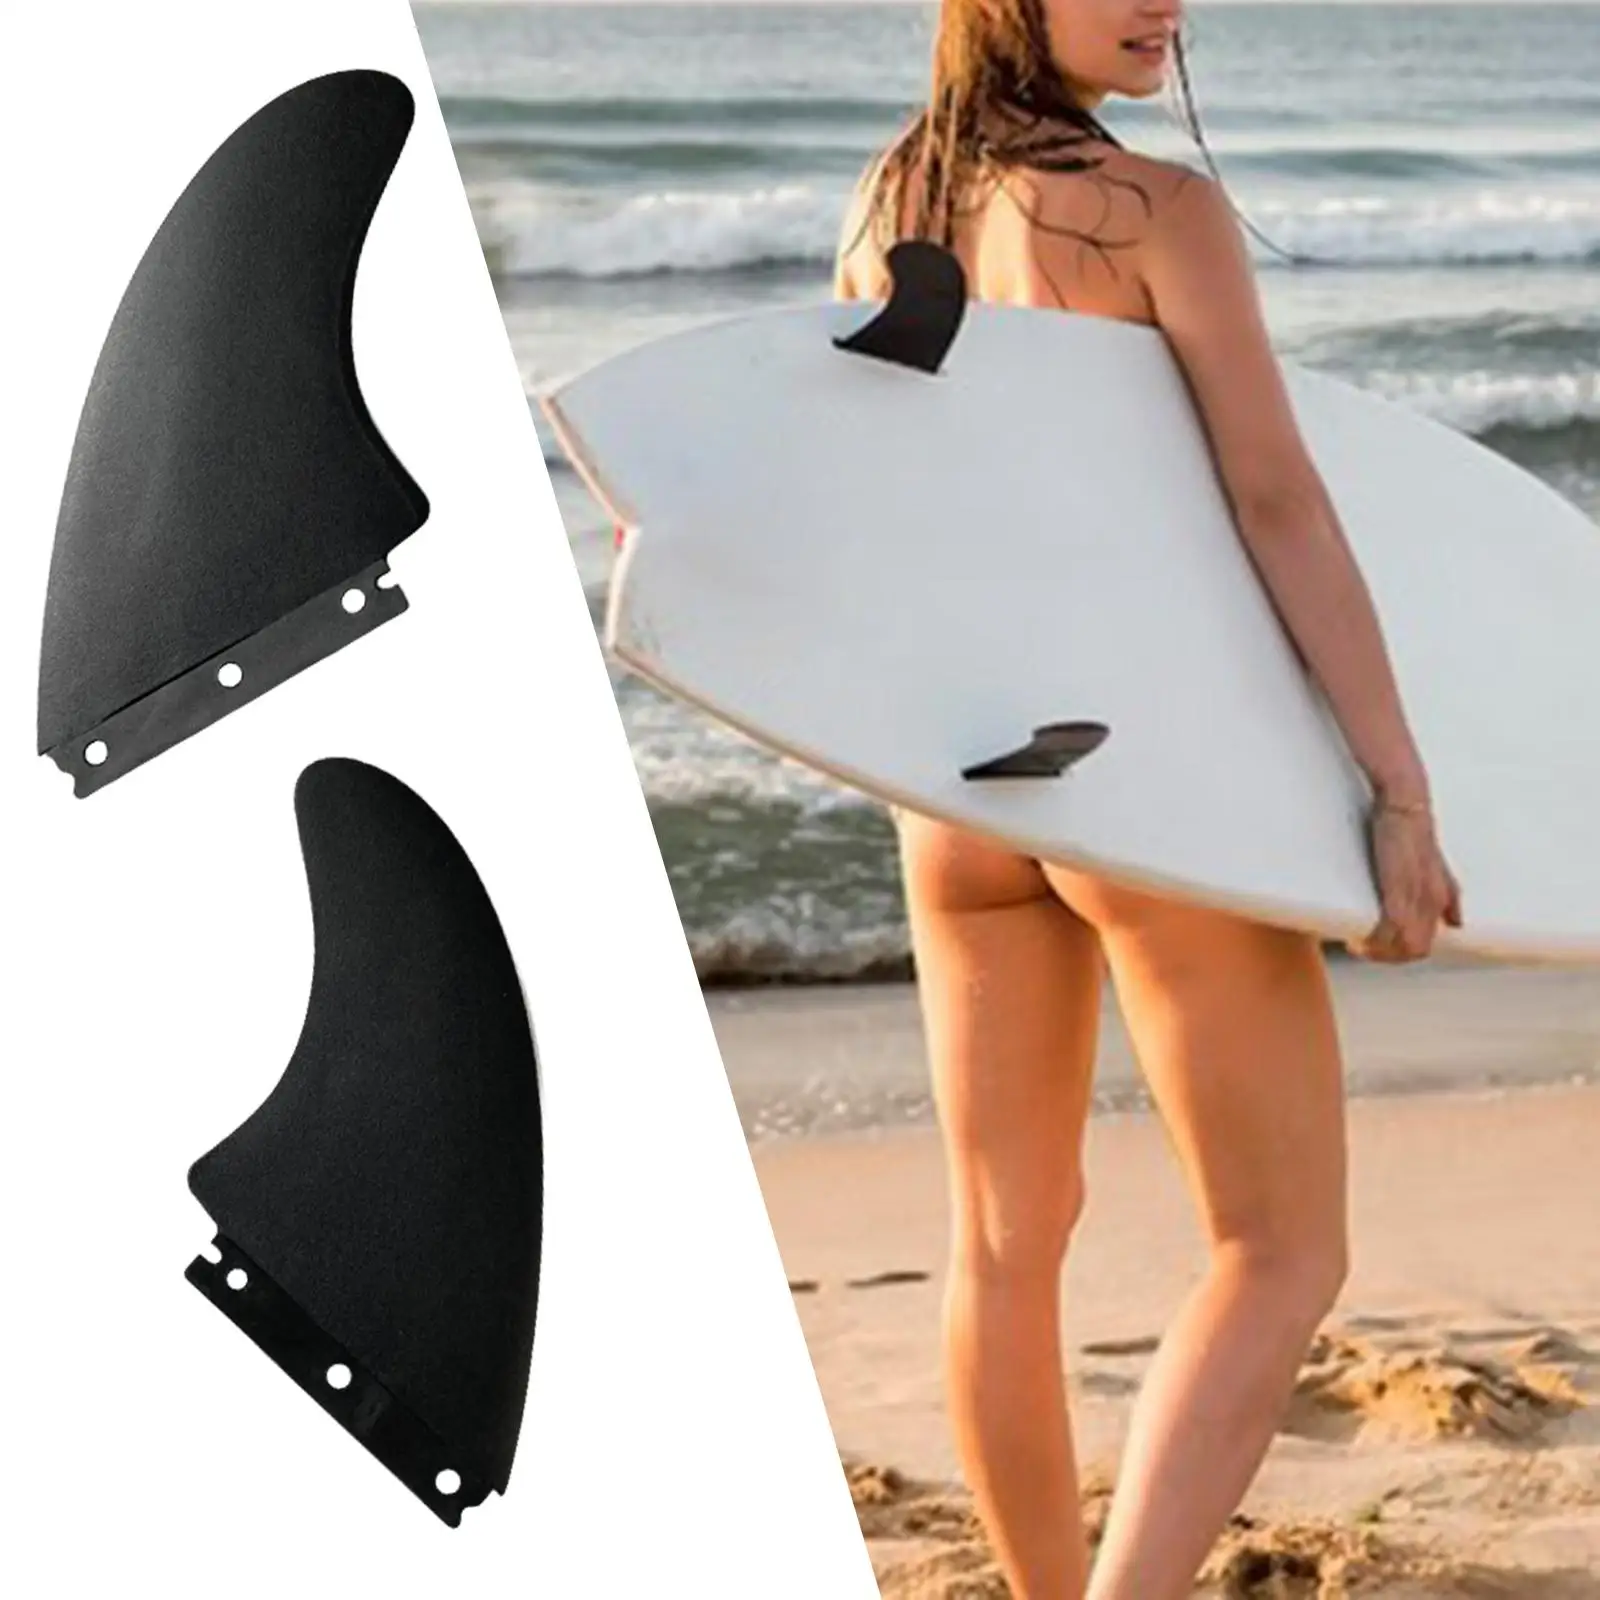 2x Surfboard Fins Water Distributor Surf Surfing Fin Replacement Surfboard Tail Rudder Durable for Water Sports Dinghy